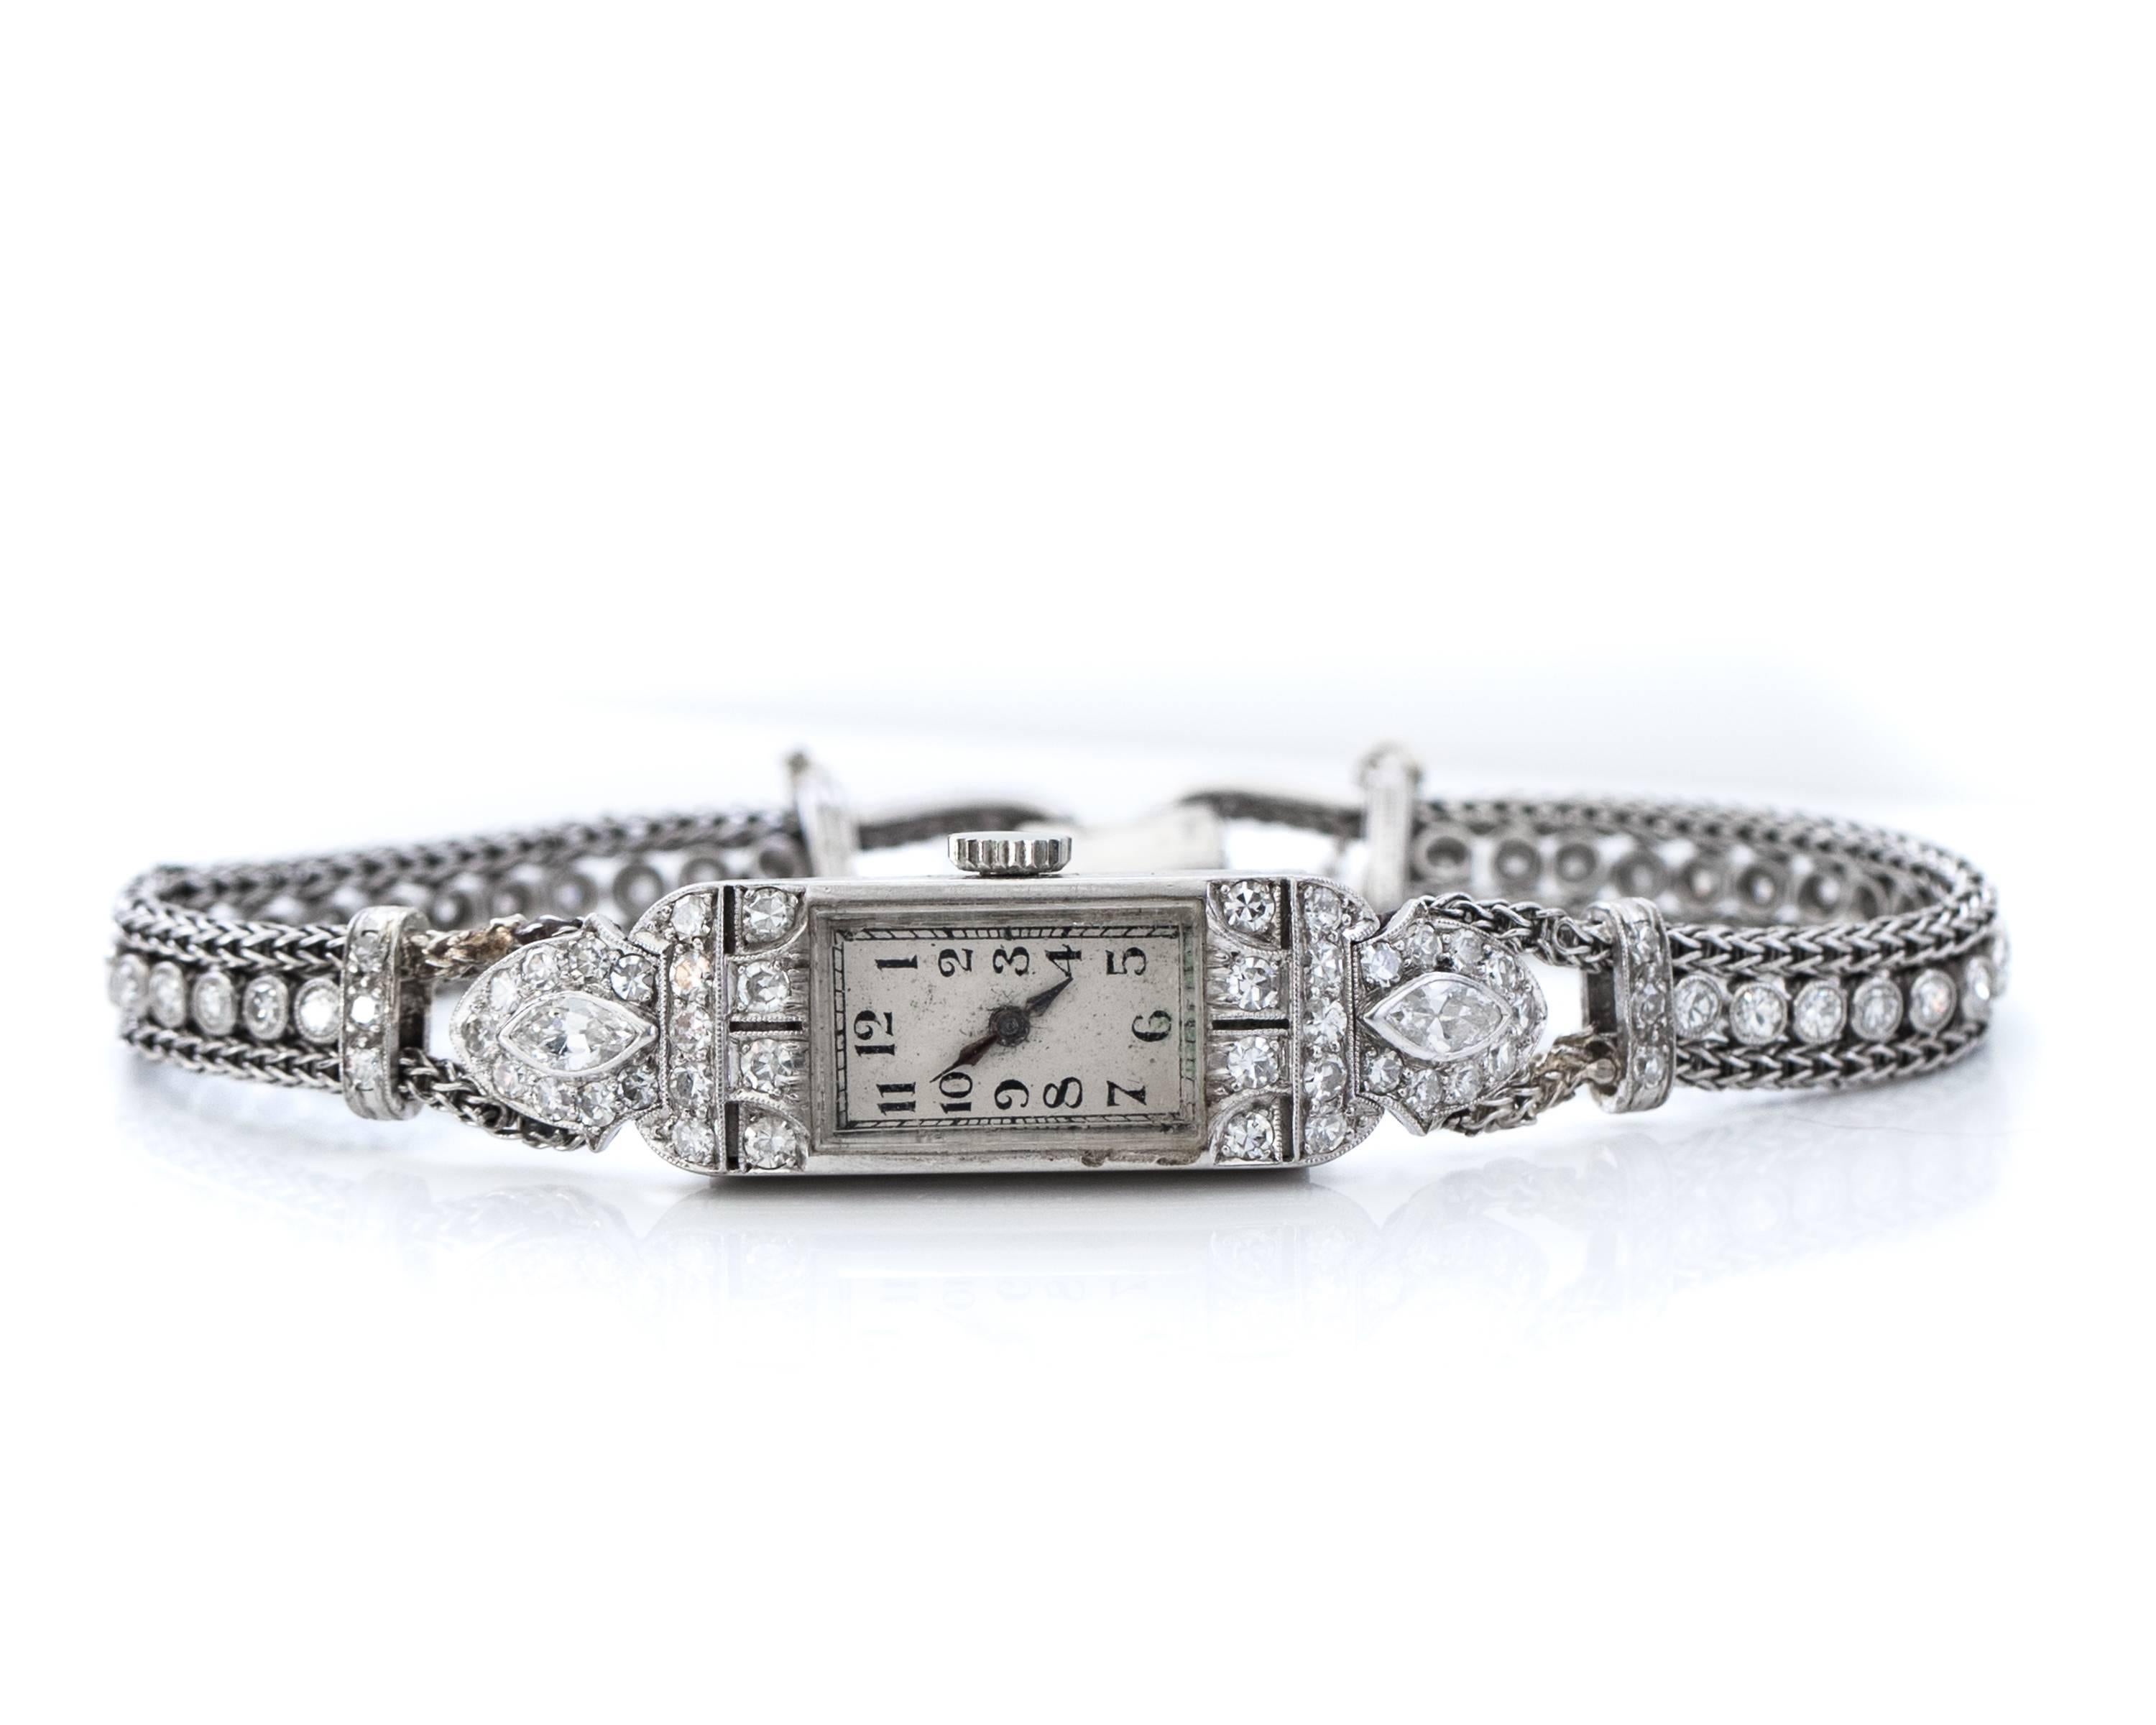 Concord Art Deco 4 cttw Diamond and Platinum Ladies Watch features a rectangle case, silvery white dial, black Arabic hour markers, hinged clasp closure with safety chain and automatic winding movement. 
The top and bottom of the bezel have 2 rows